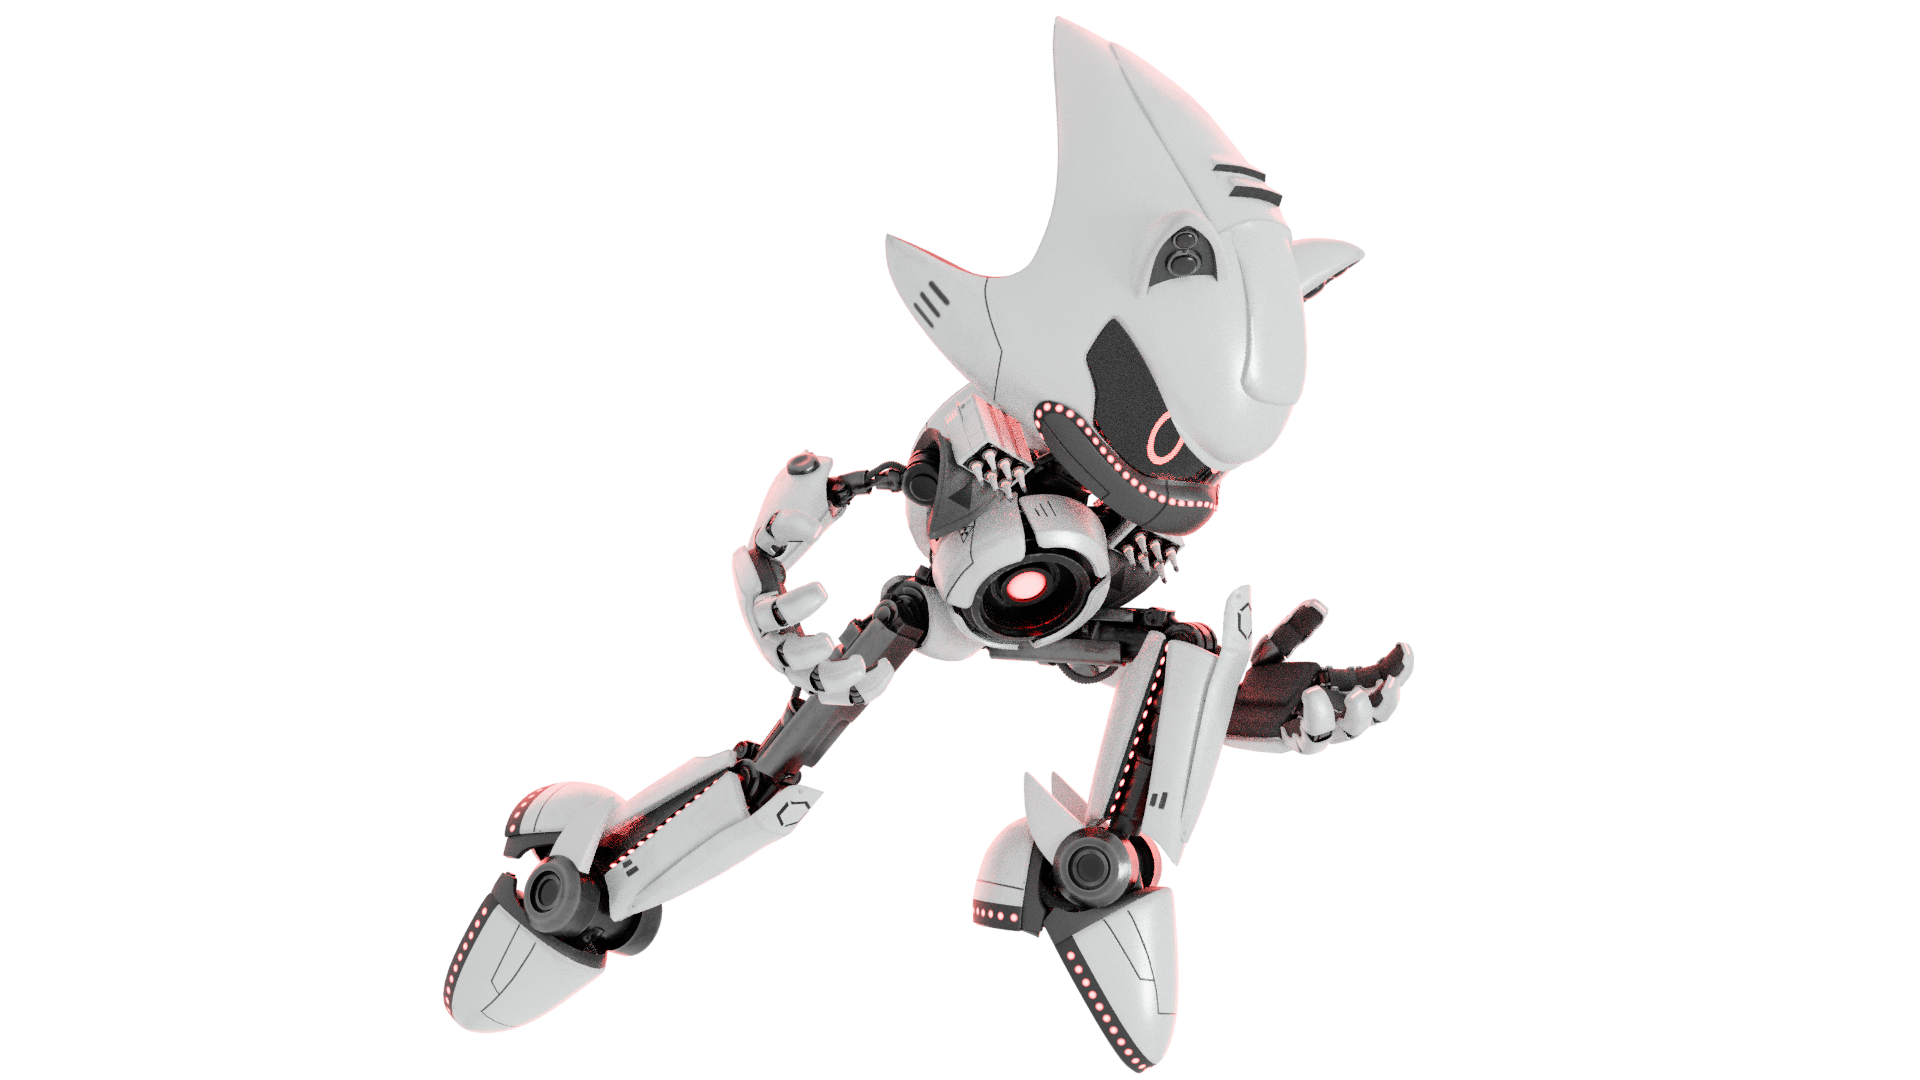 Sonic Boom - Metal Sonic the robot enemy of Sonic